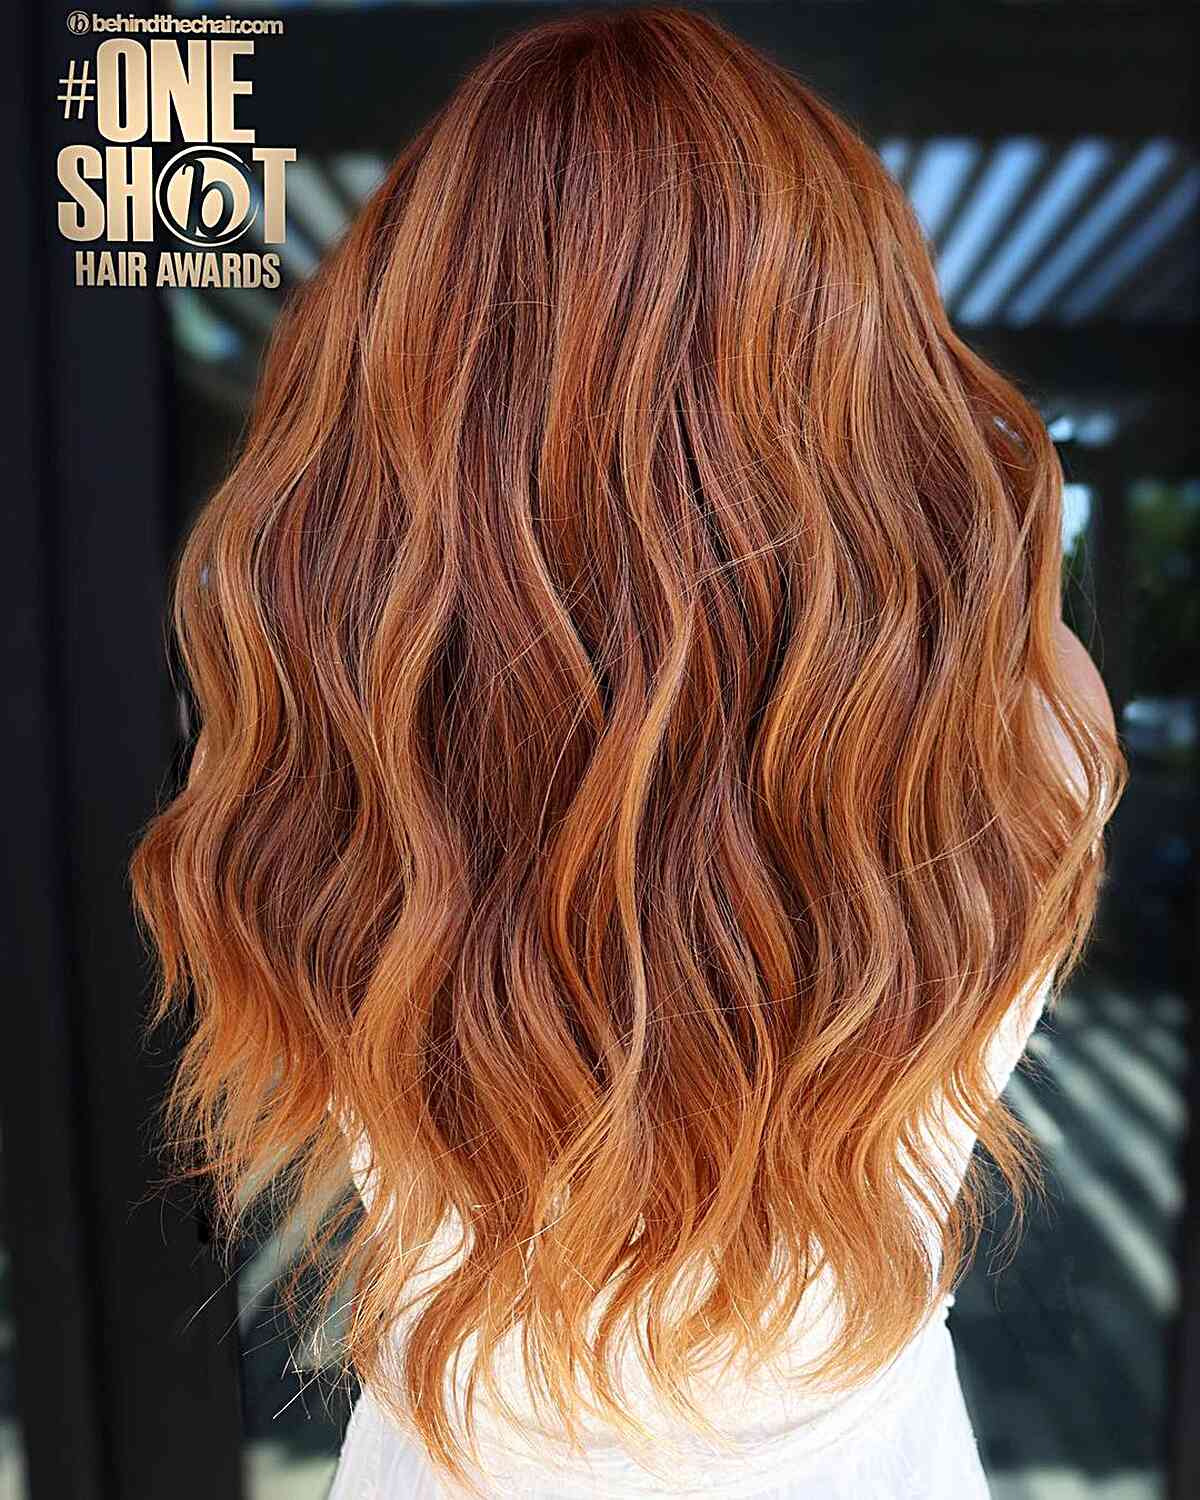 Sunset-Inspired Chestnut to Brighter Copper Ombre